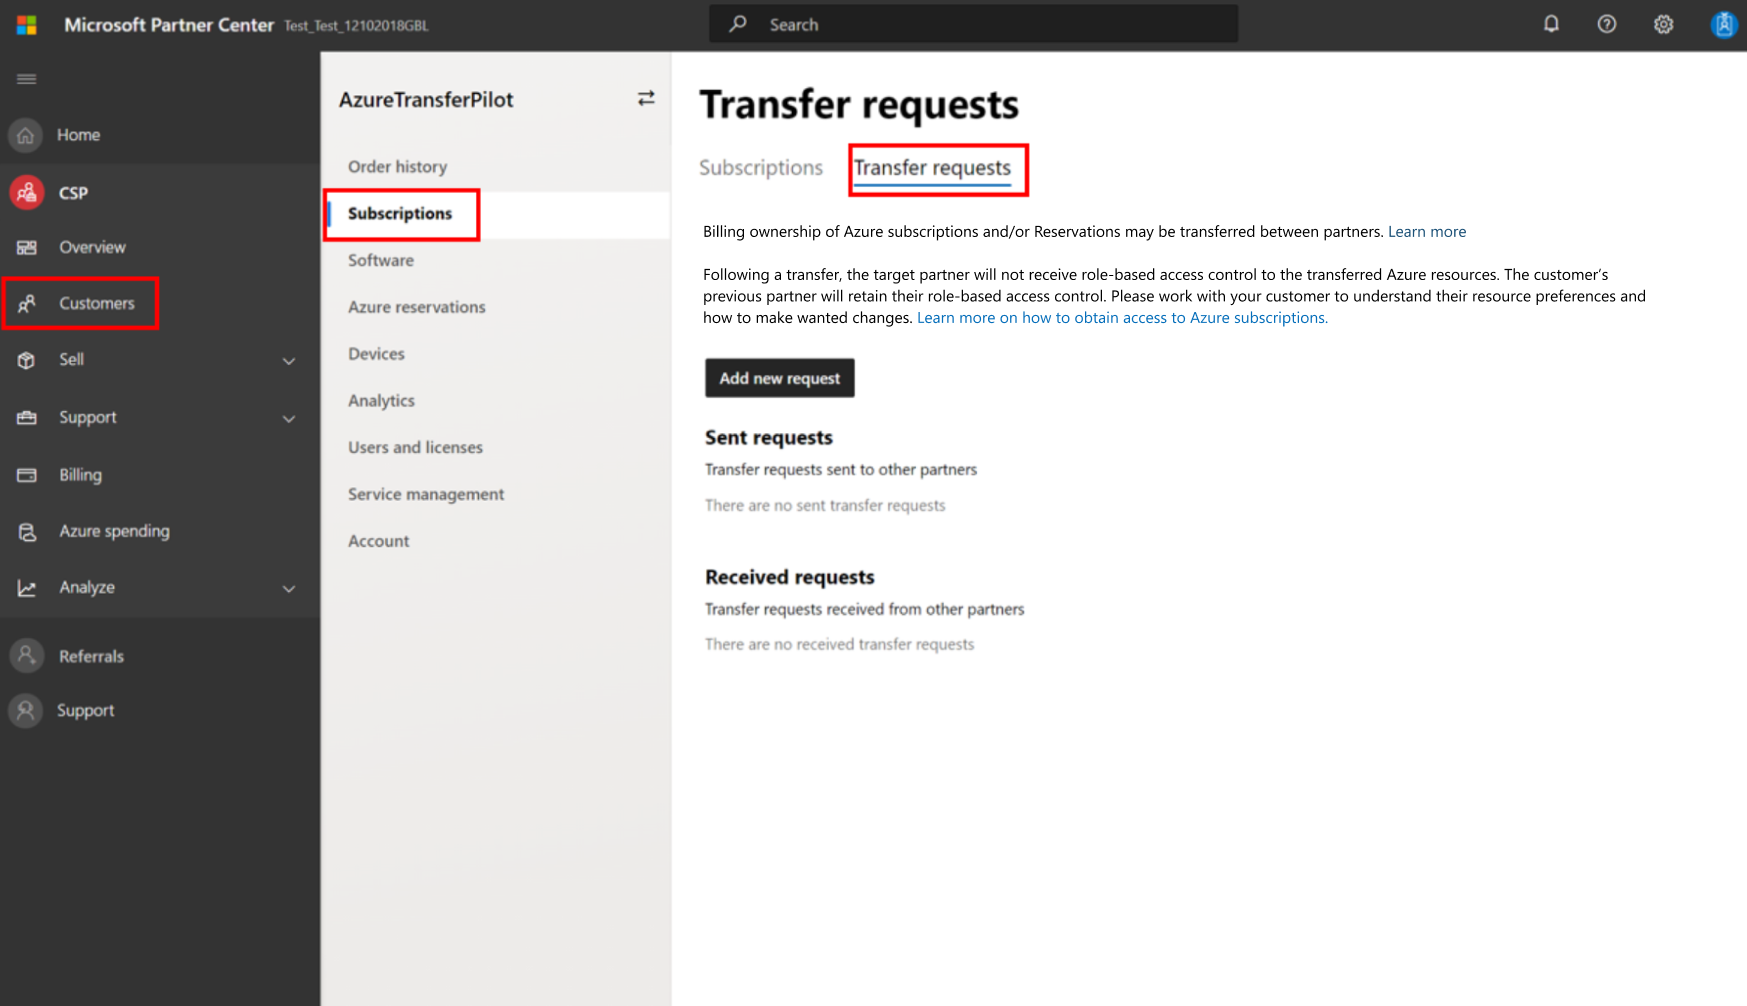 Screenshot that shows the Transfer requests tab.